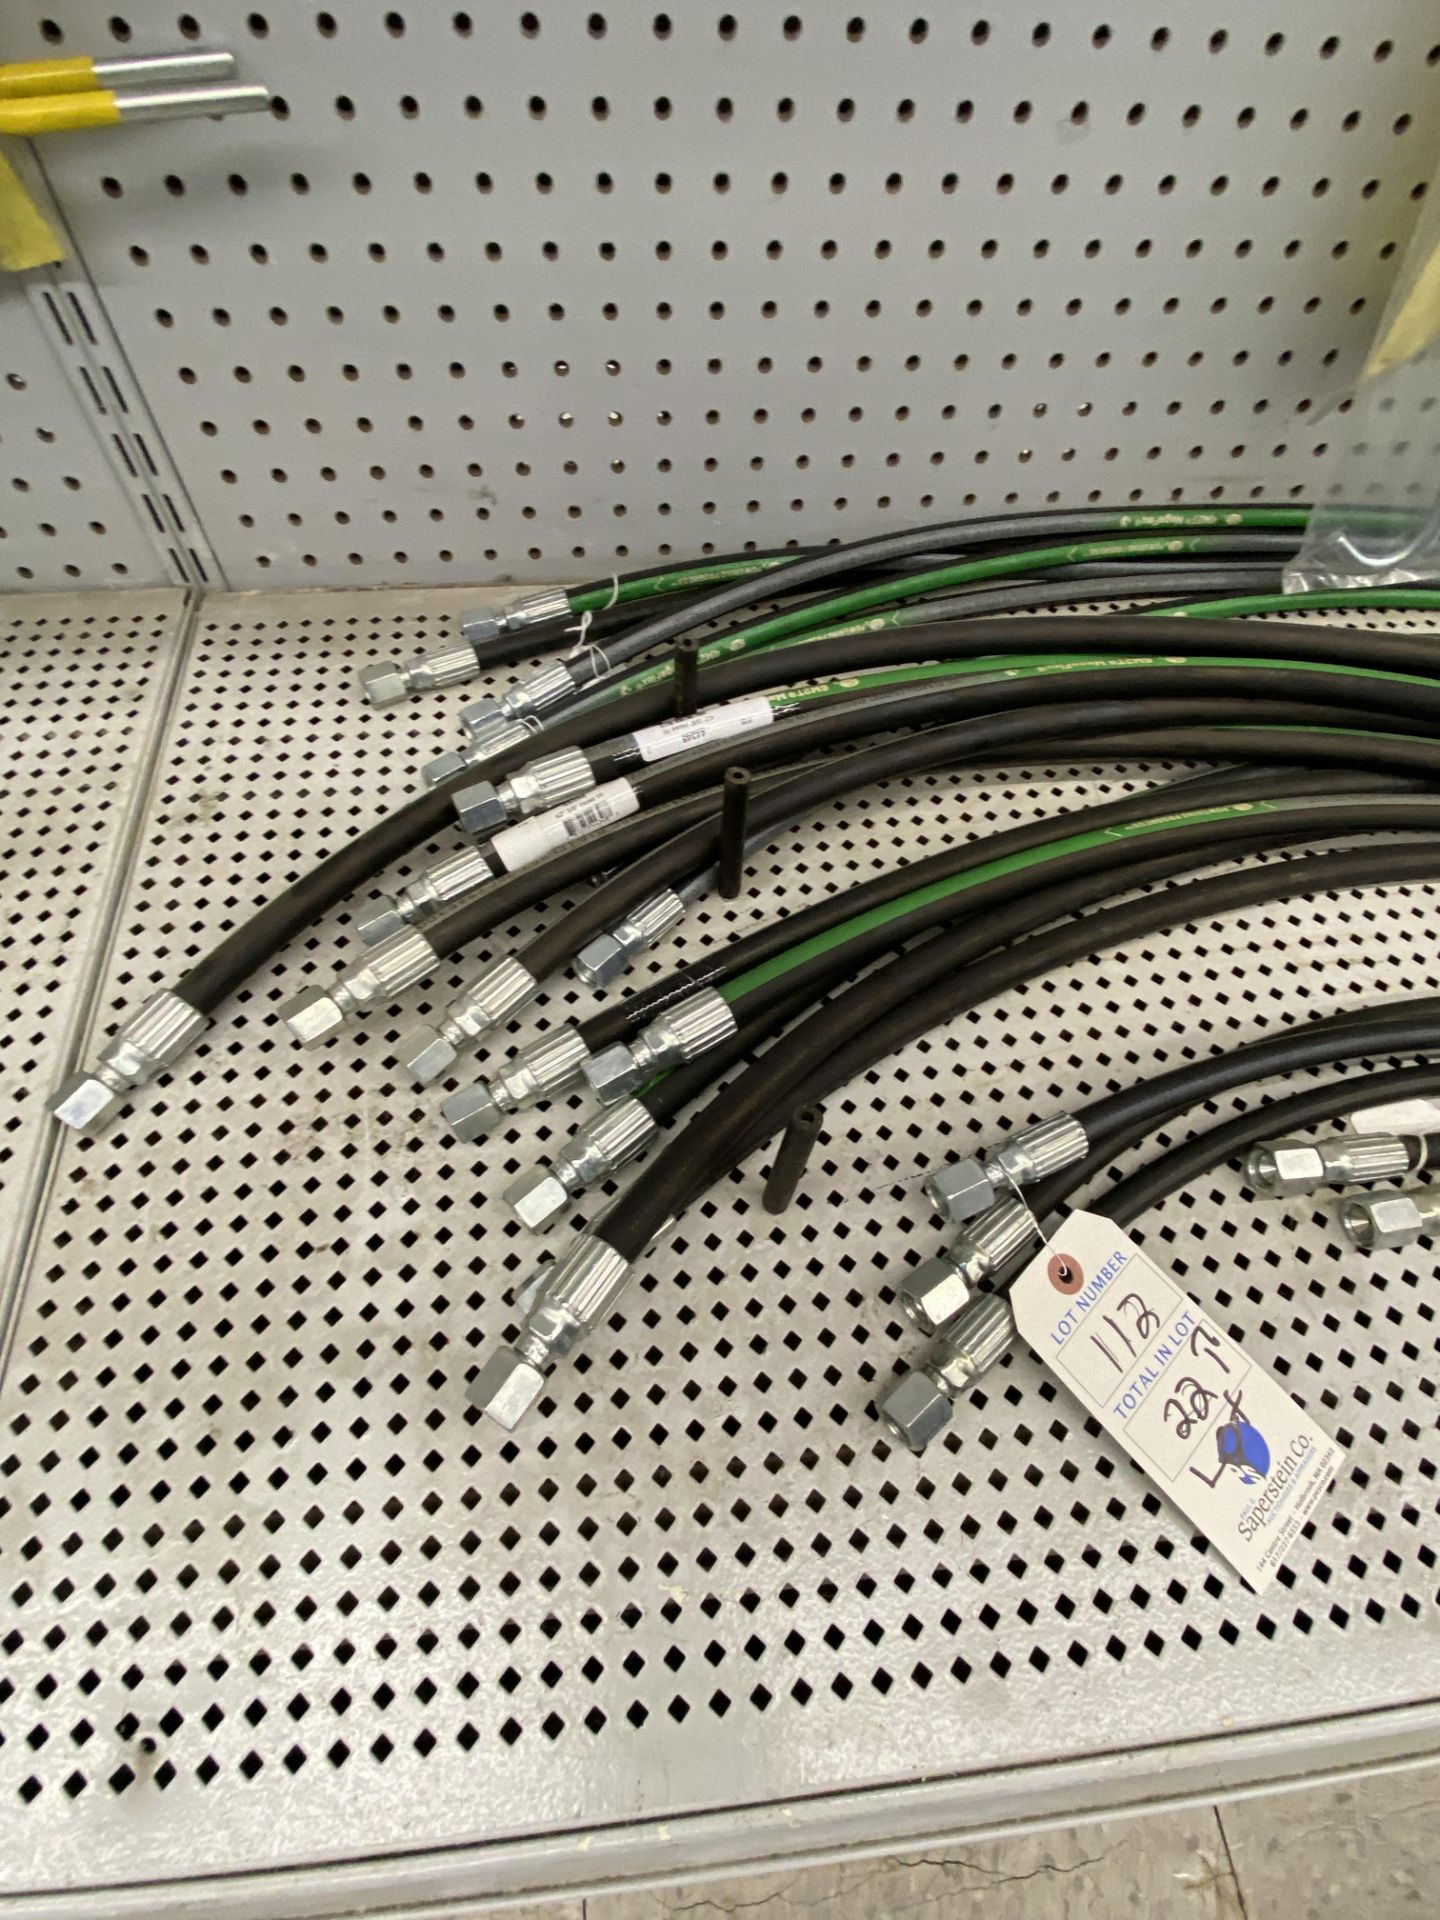 {LOT} (22) Asst. Fisher Hydraulic Hose for Lift and Angle Wholesale Value: 35 Each - Image 8 of 8